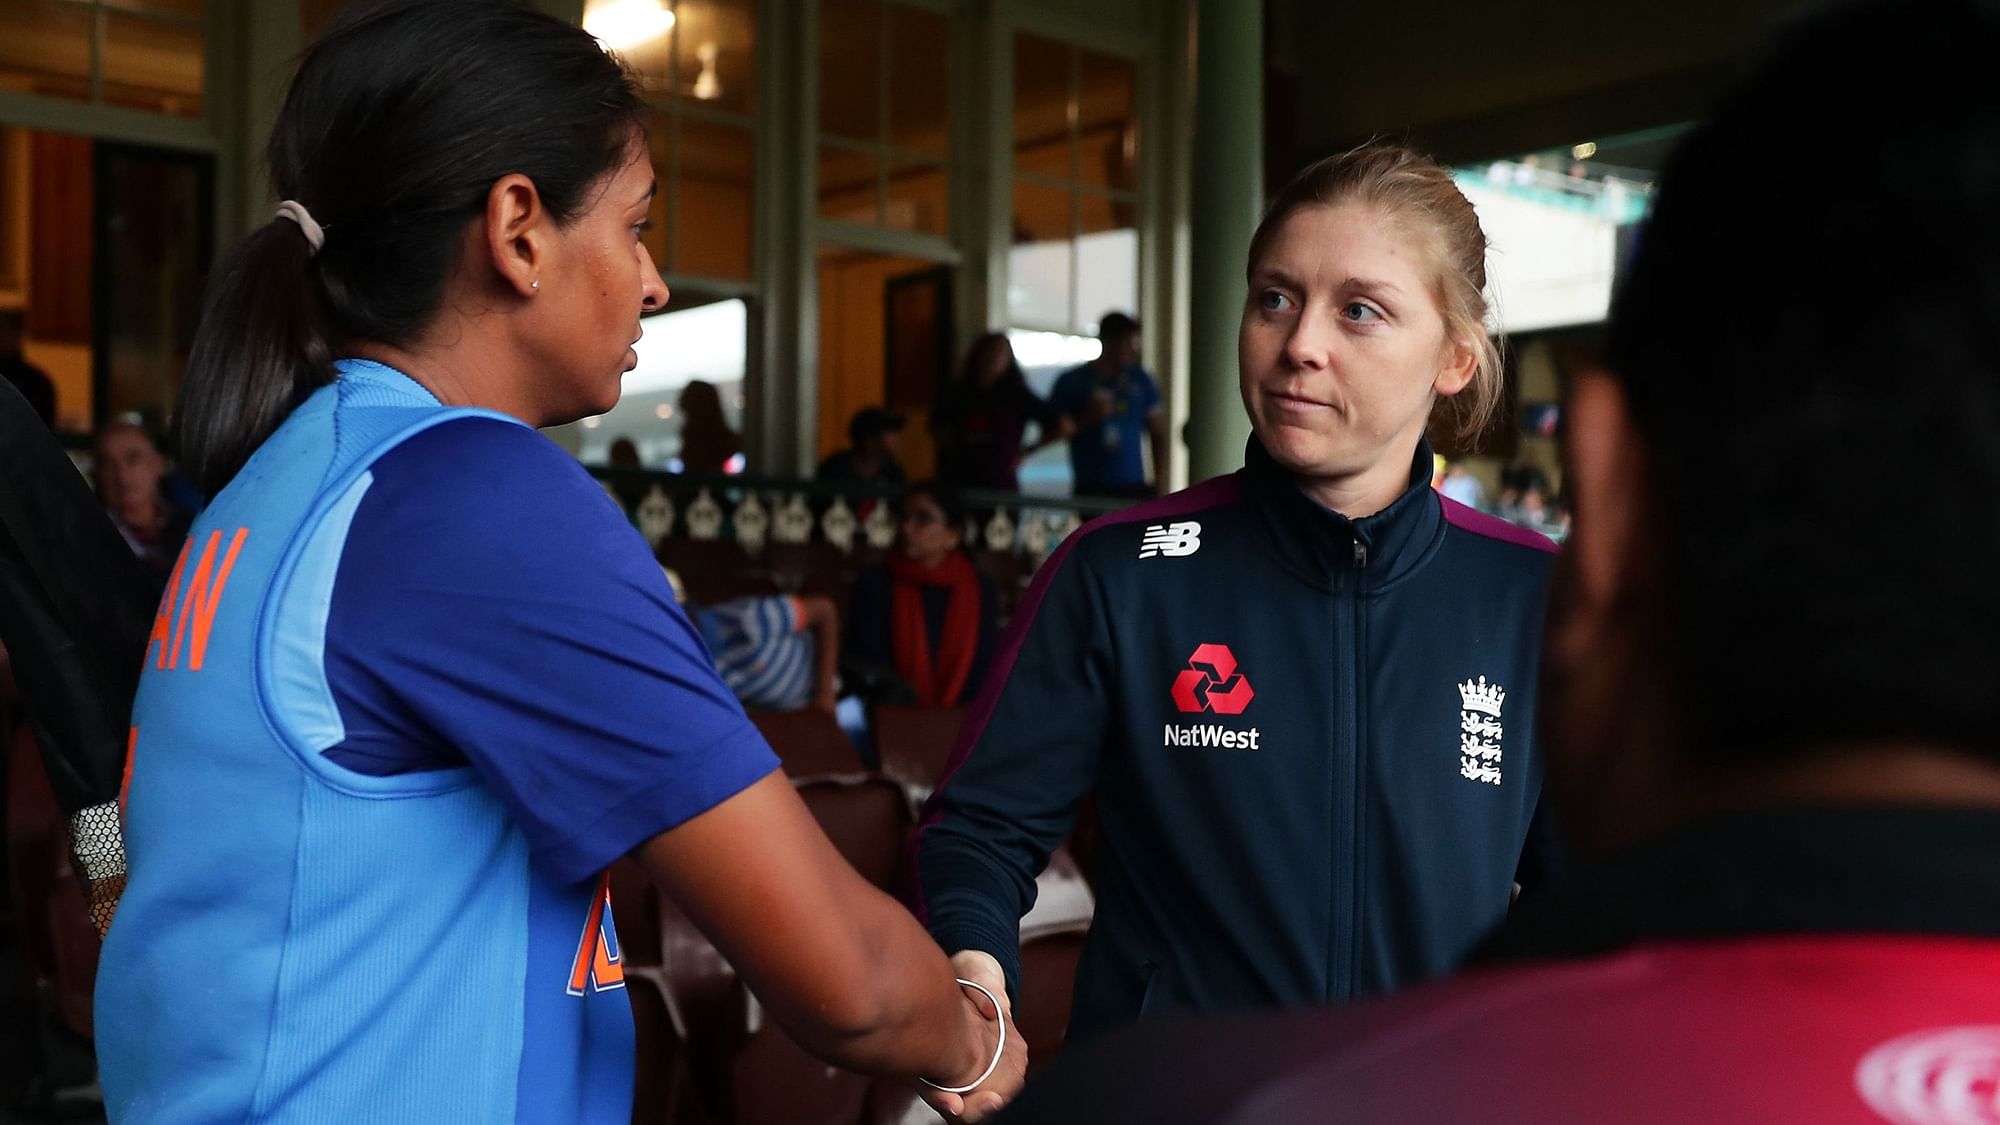 Captains shake hands as India enter the Women’s T20 World Cup Final after their semi-final against England was washed out due to rain.